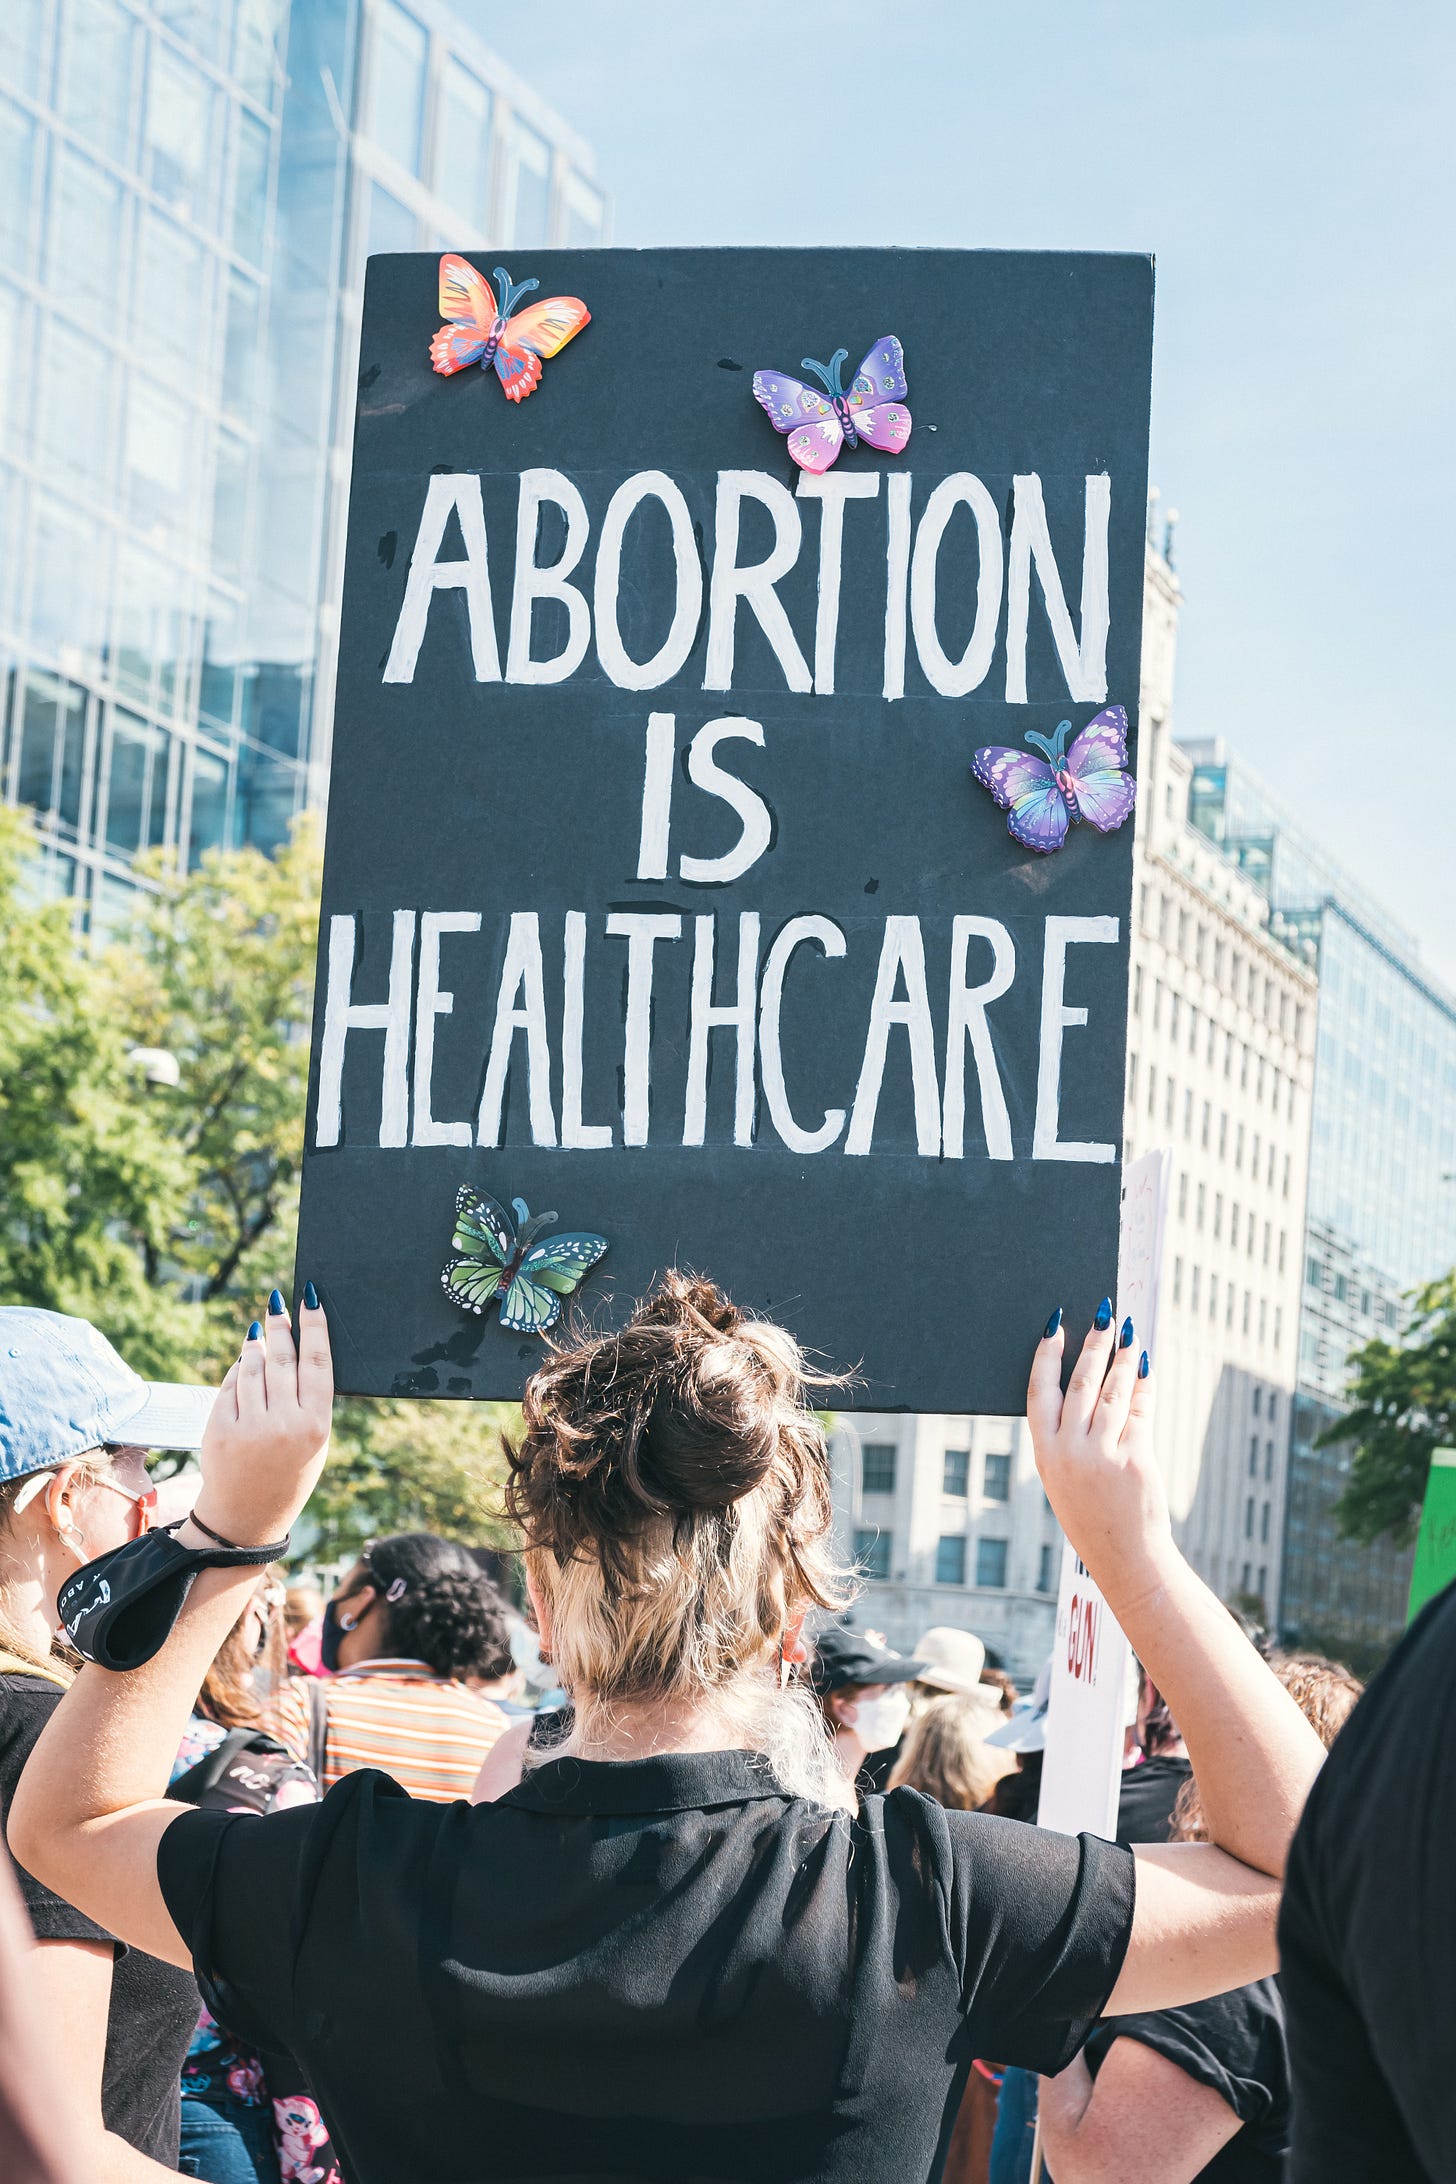 A close-up of a homemade sign at an abortion rights protest. On a black background, text in white lettering says ‘Abortion Is Healthcare’. The slogan is surrounded by butterflies.